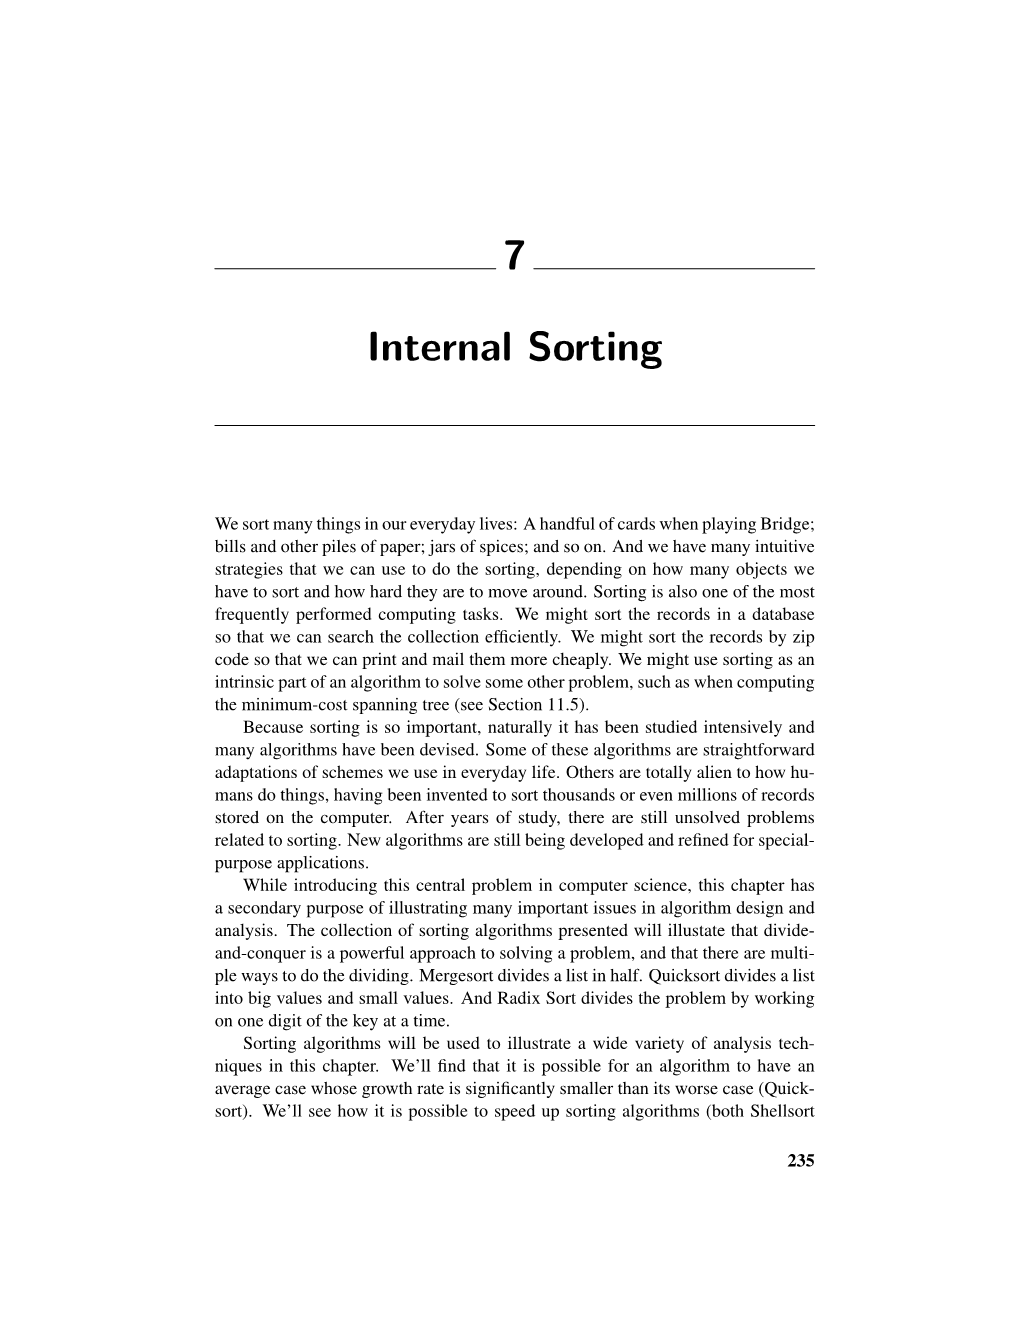 7 Internal Sorting and Quicksort) by Taking Advantage of the Best Case Behavior of Another Algorithm (Insertion Sort)